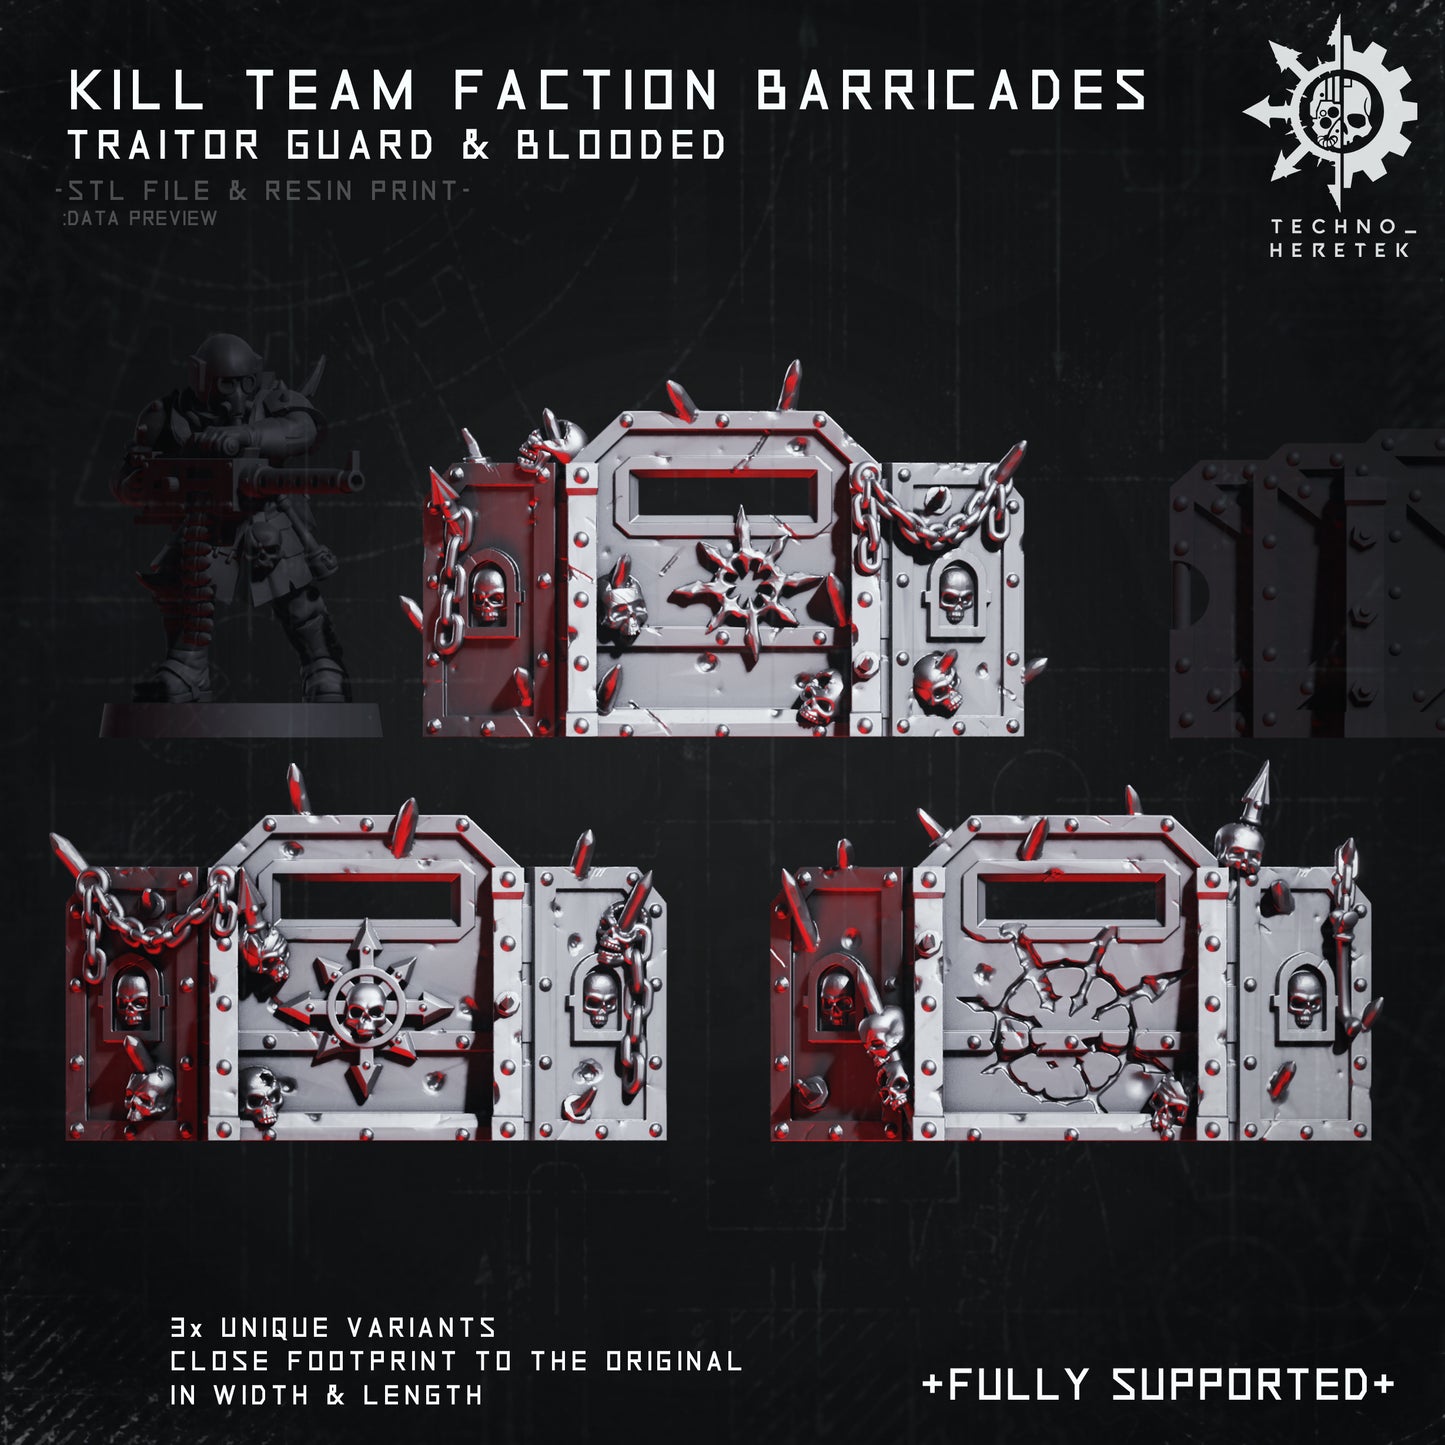 Traitor Guard & Blooded Faction Barricades